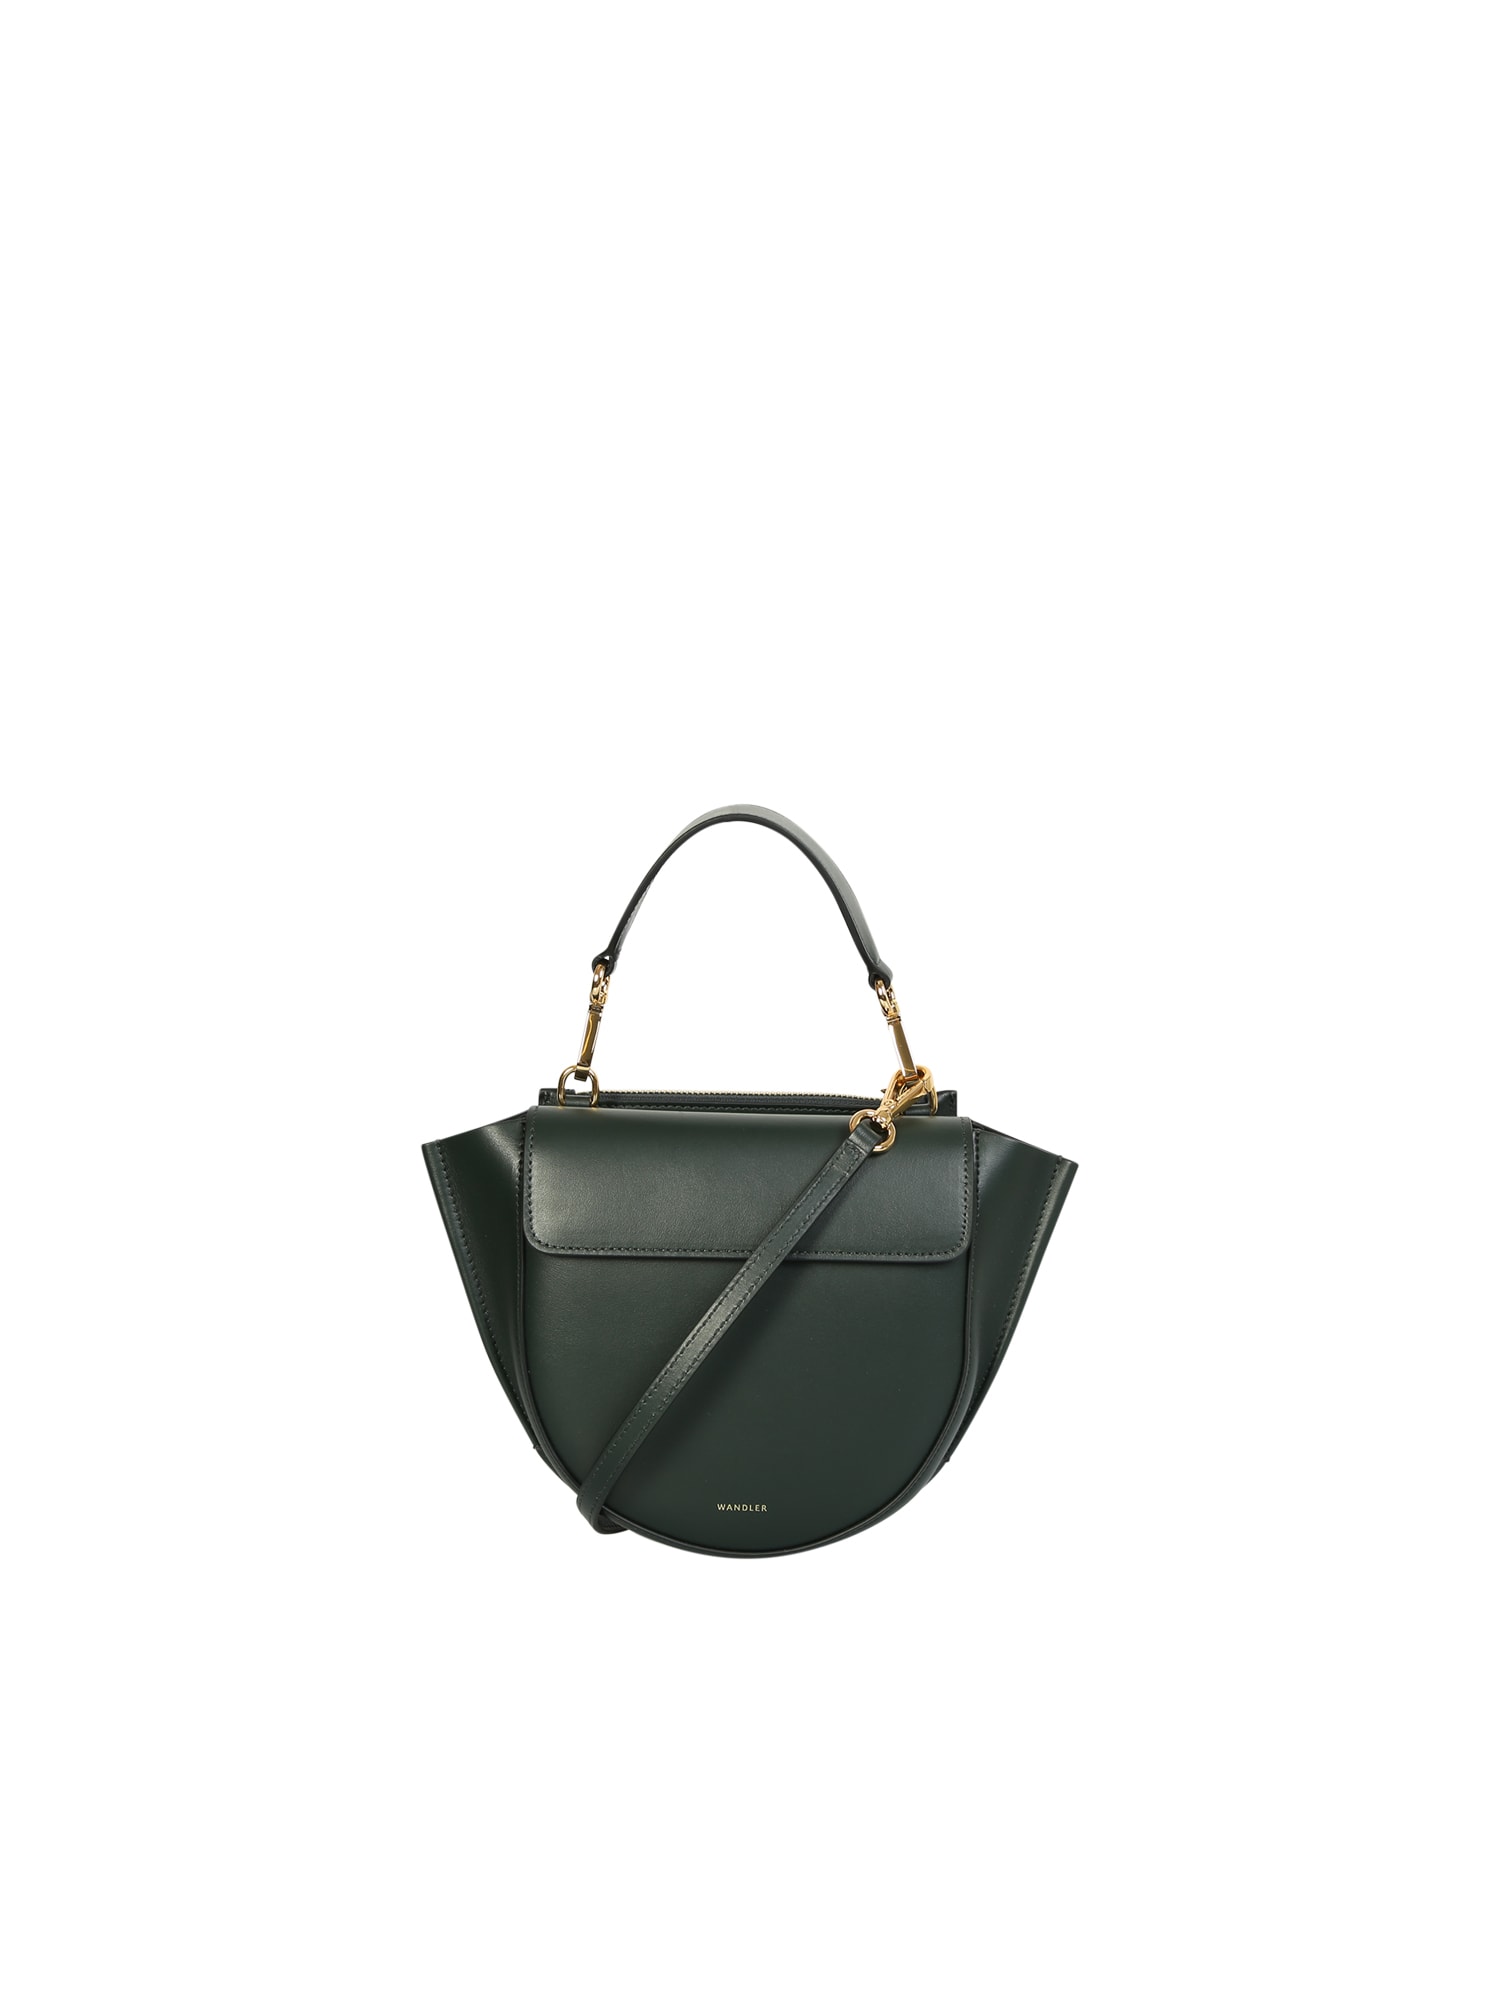 Wandler Hortensia Mini Fortune Bag, In This Version The Bag Is Even More Practical And Cool